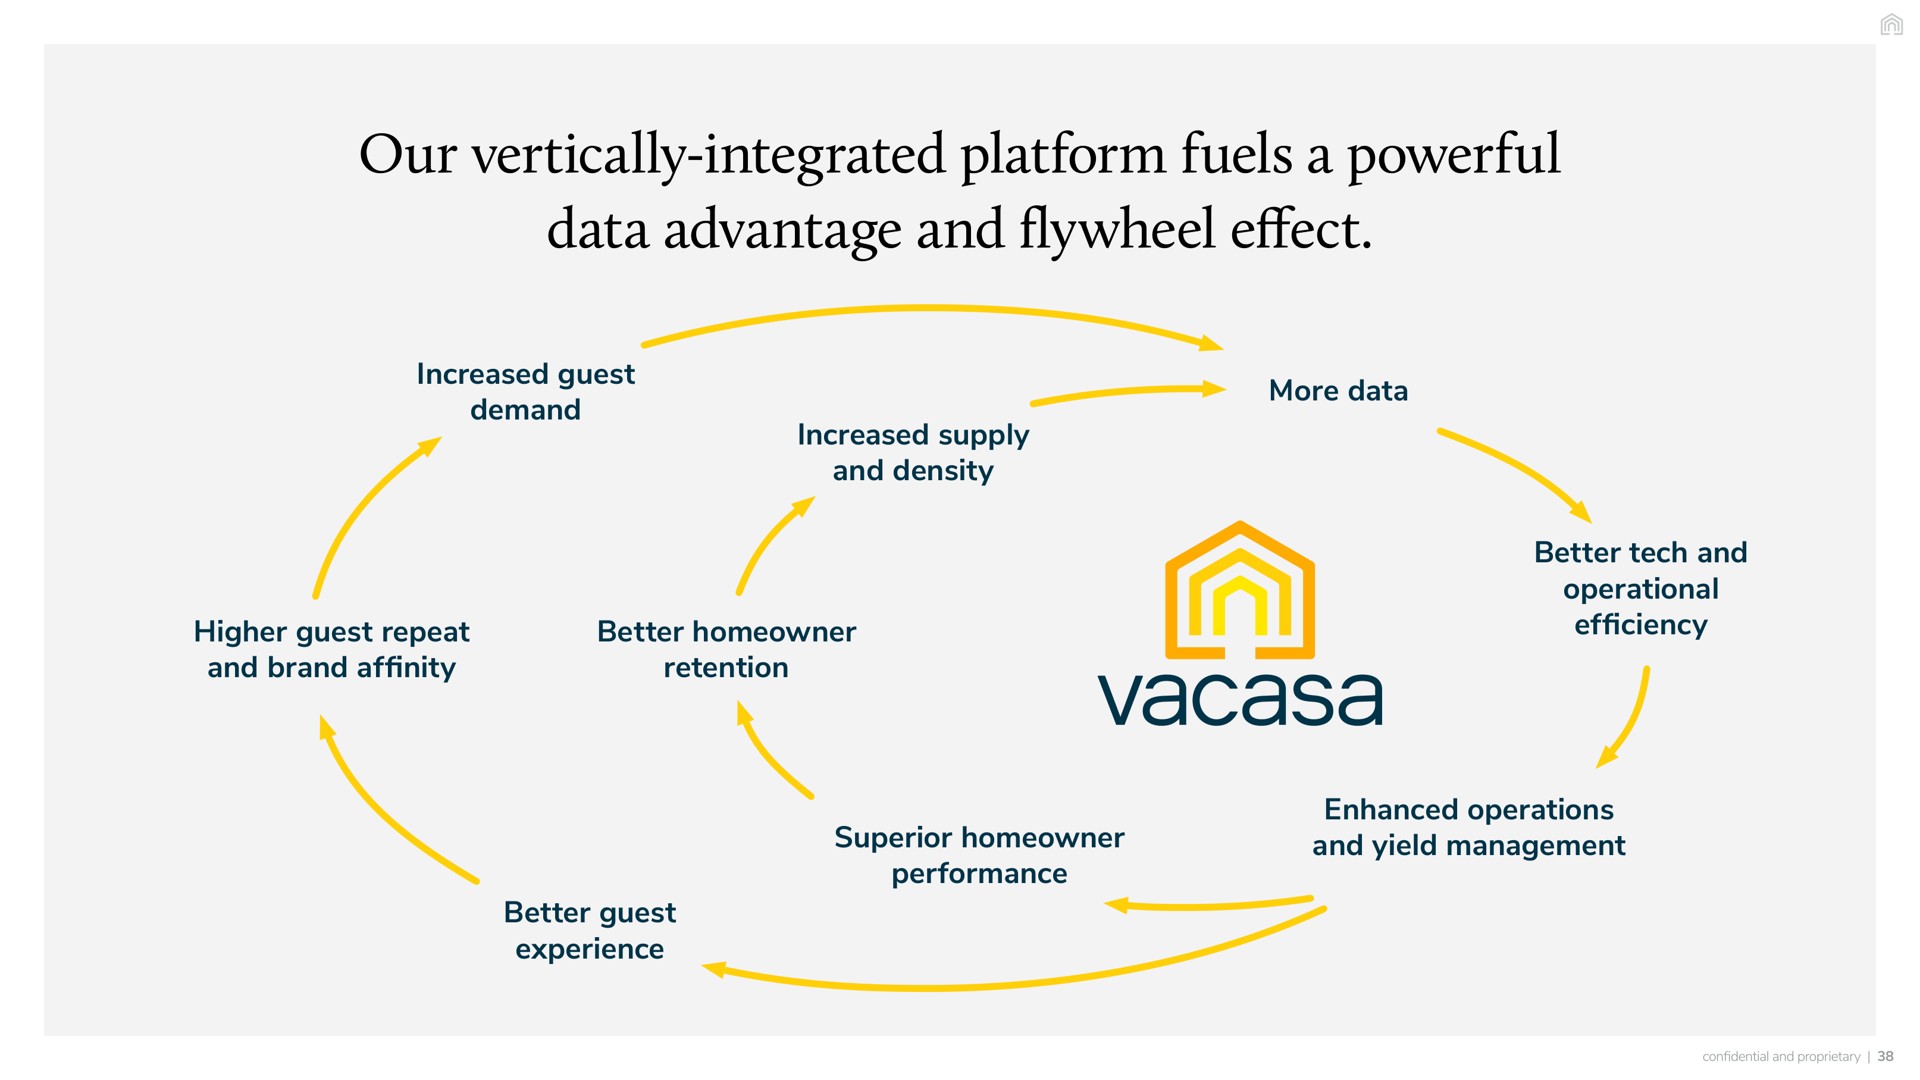 our vertically integrated platform fuels a powerful data advantage and flywheel effect increased guest demand increased supply density more higher guest repeat brand affinity better homeowner retention better tech operational efficiency superior homeowner performance enhanced operations yield management better guest experience | Vacasa